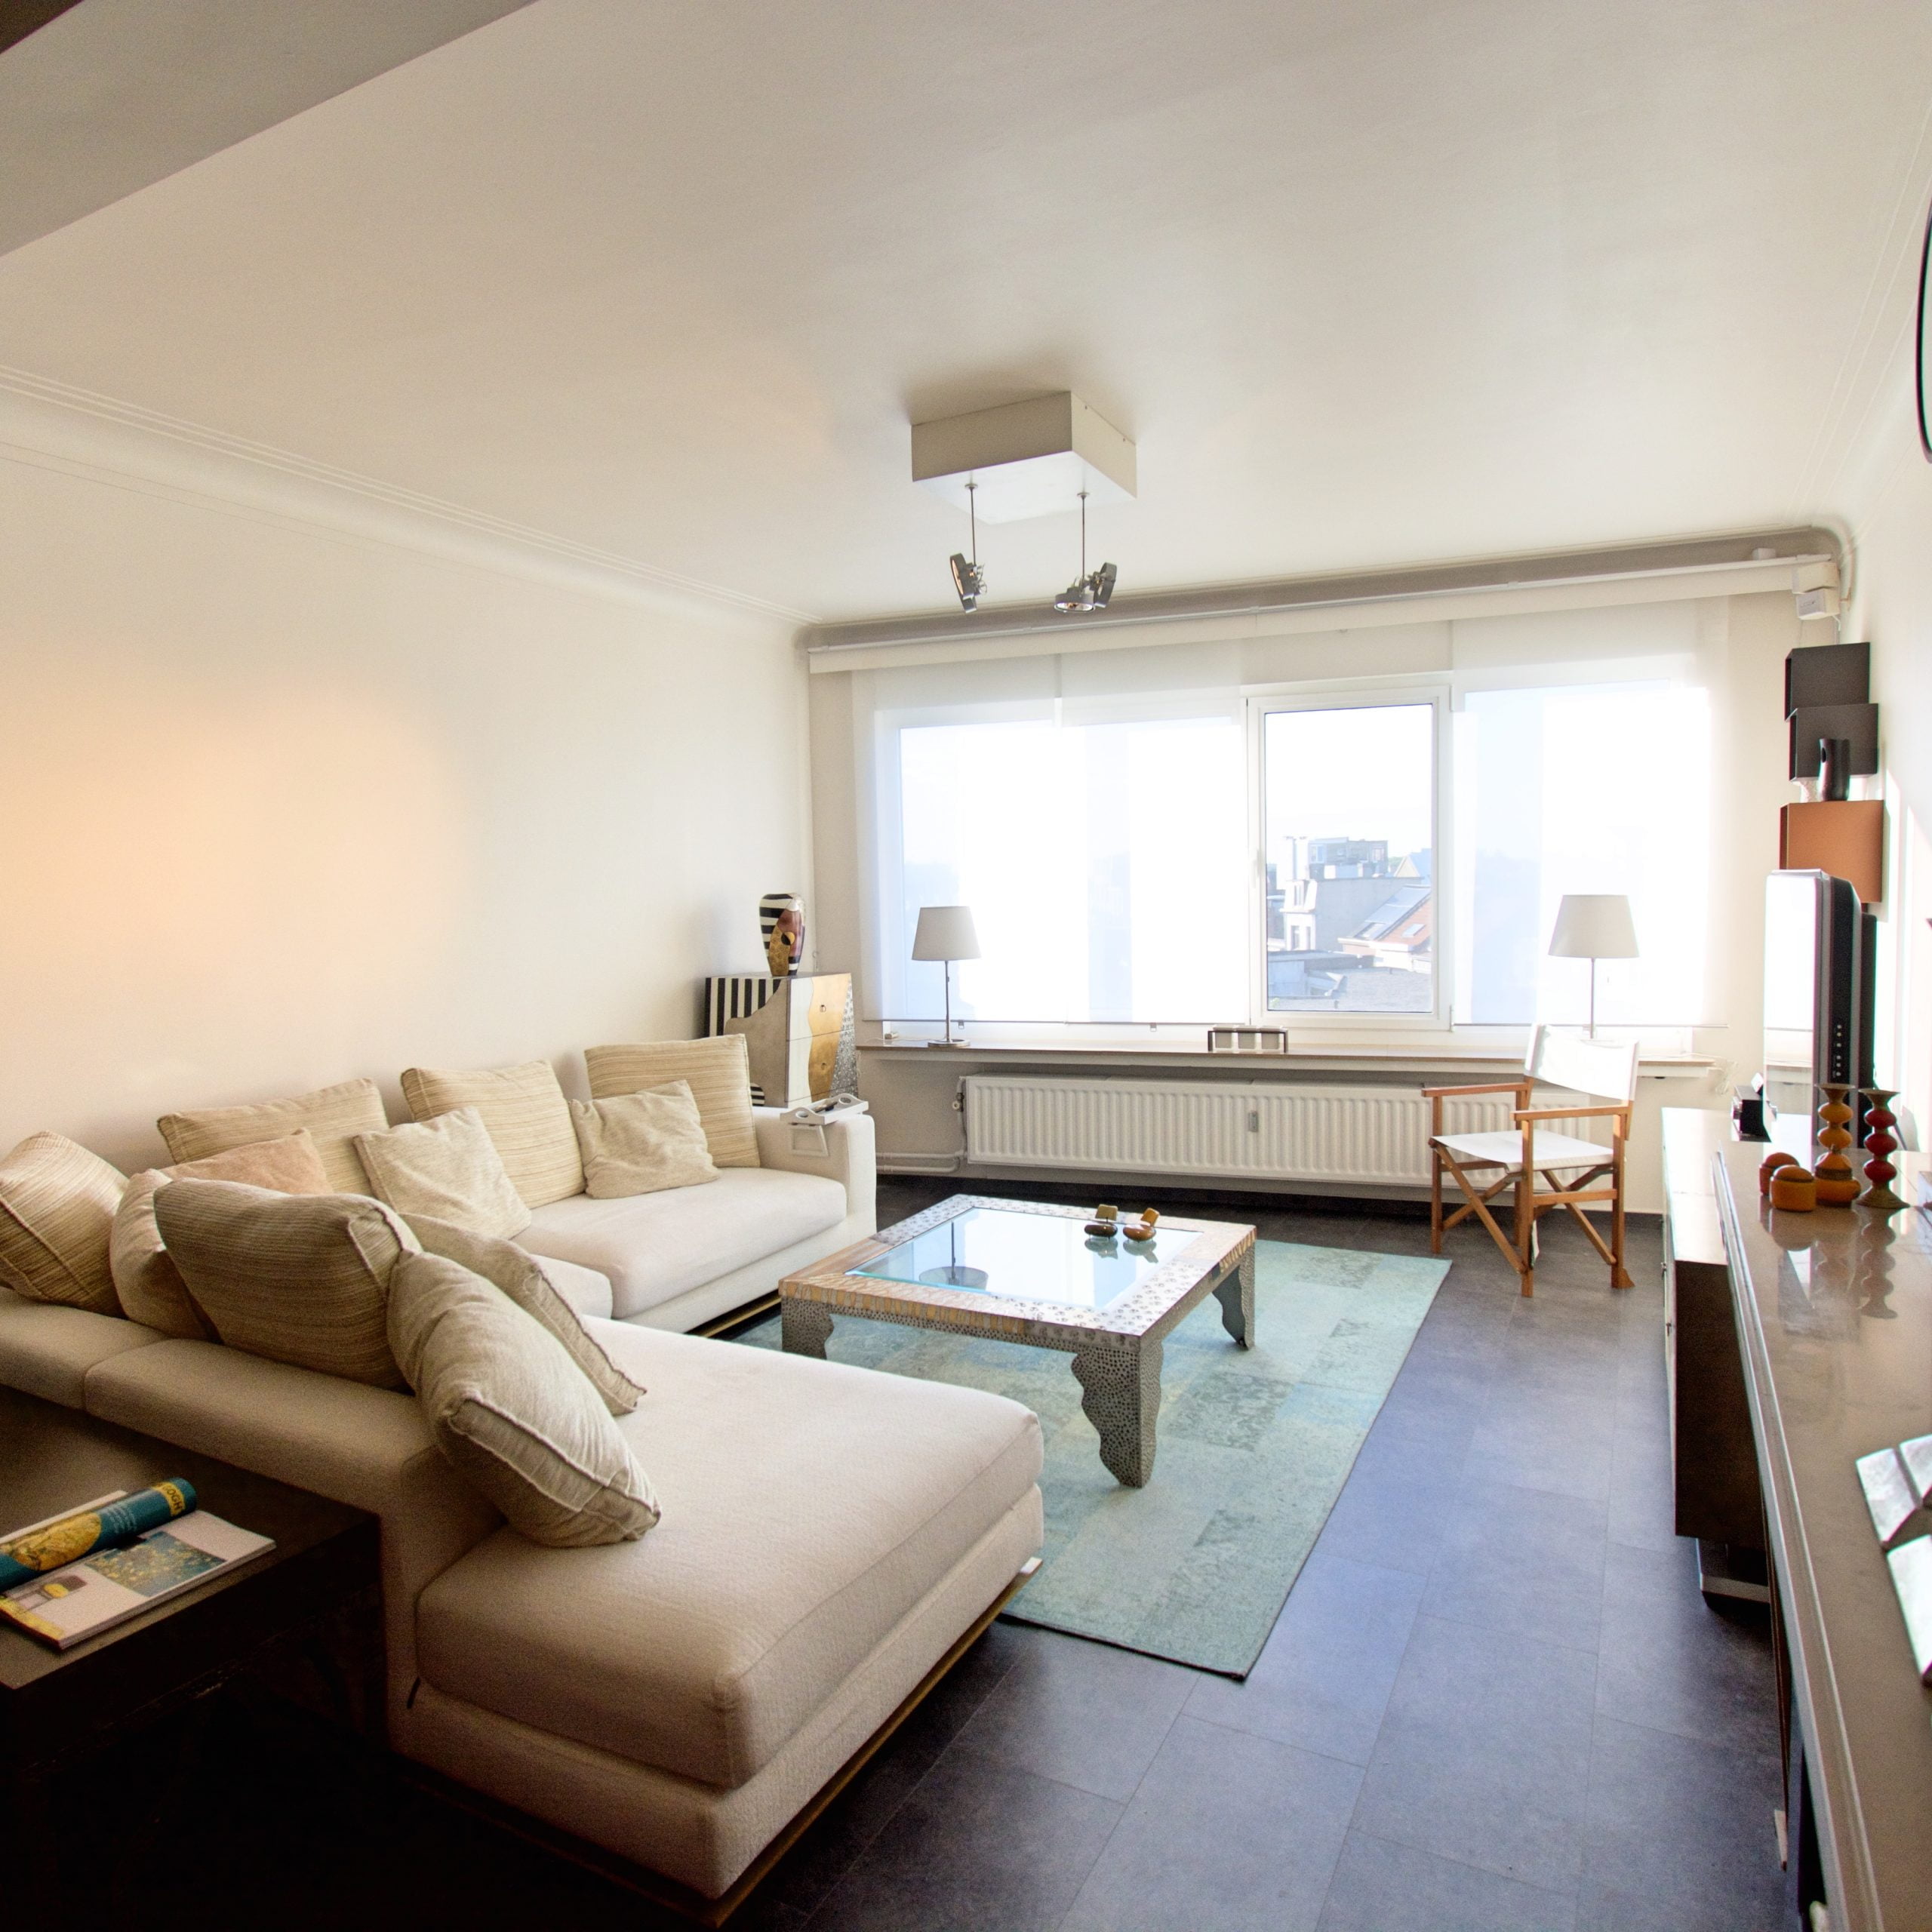 2 bedroom apartment in Antwerp for expats